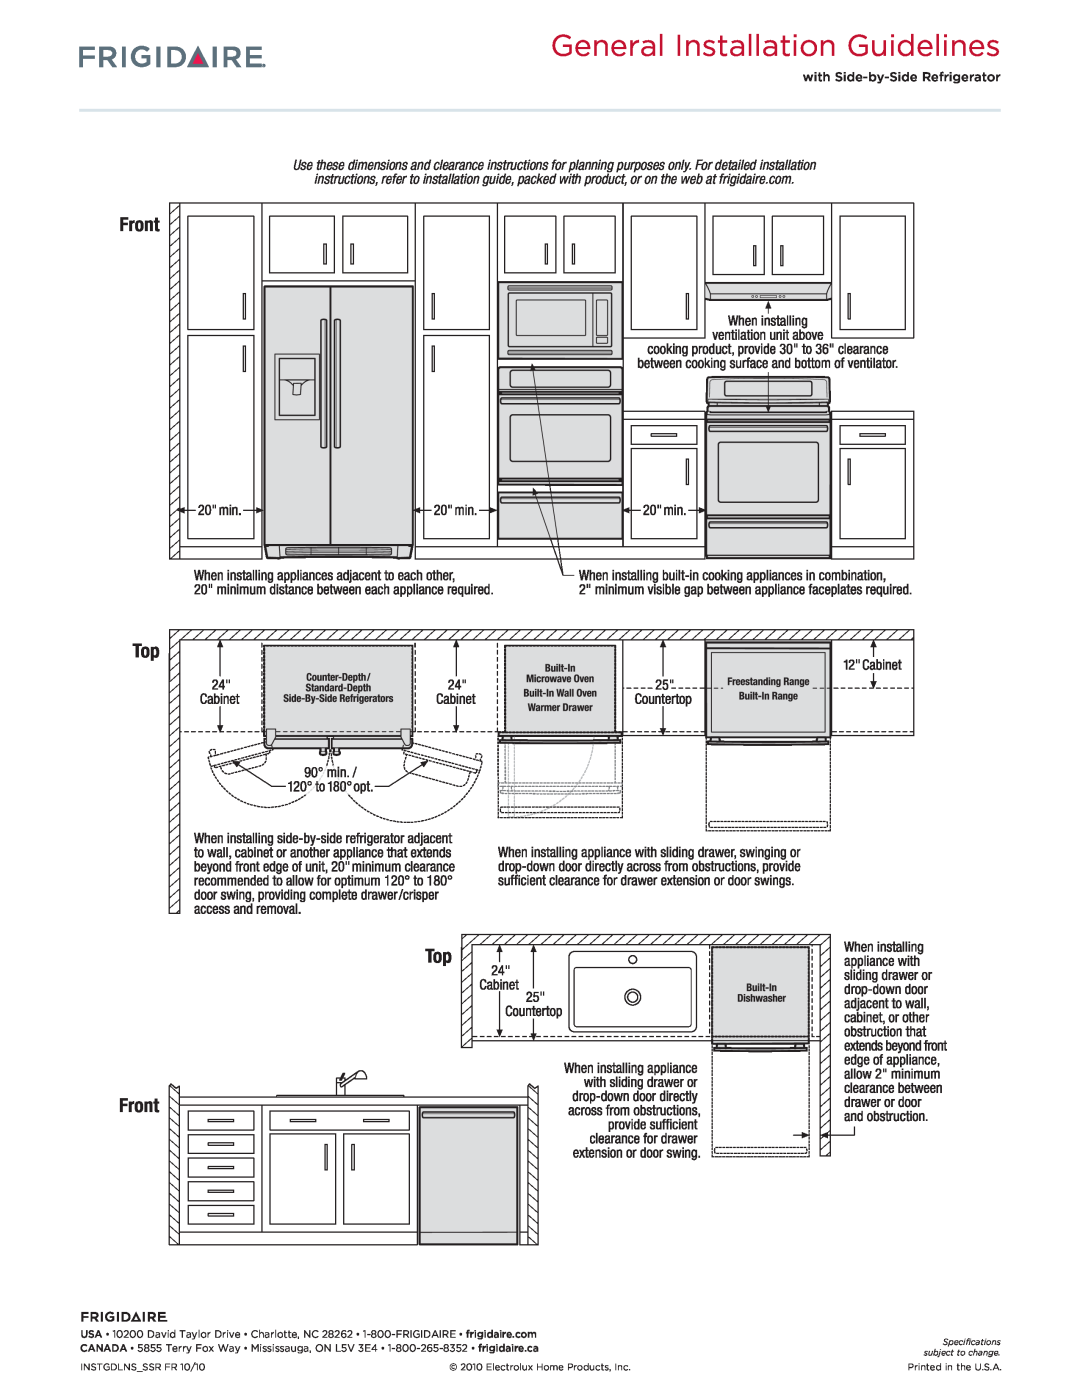 Frigidaire FFGF3017L dimensions General Installation Guidelines, Top Front 